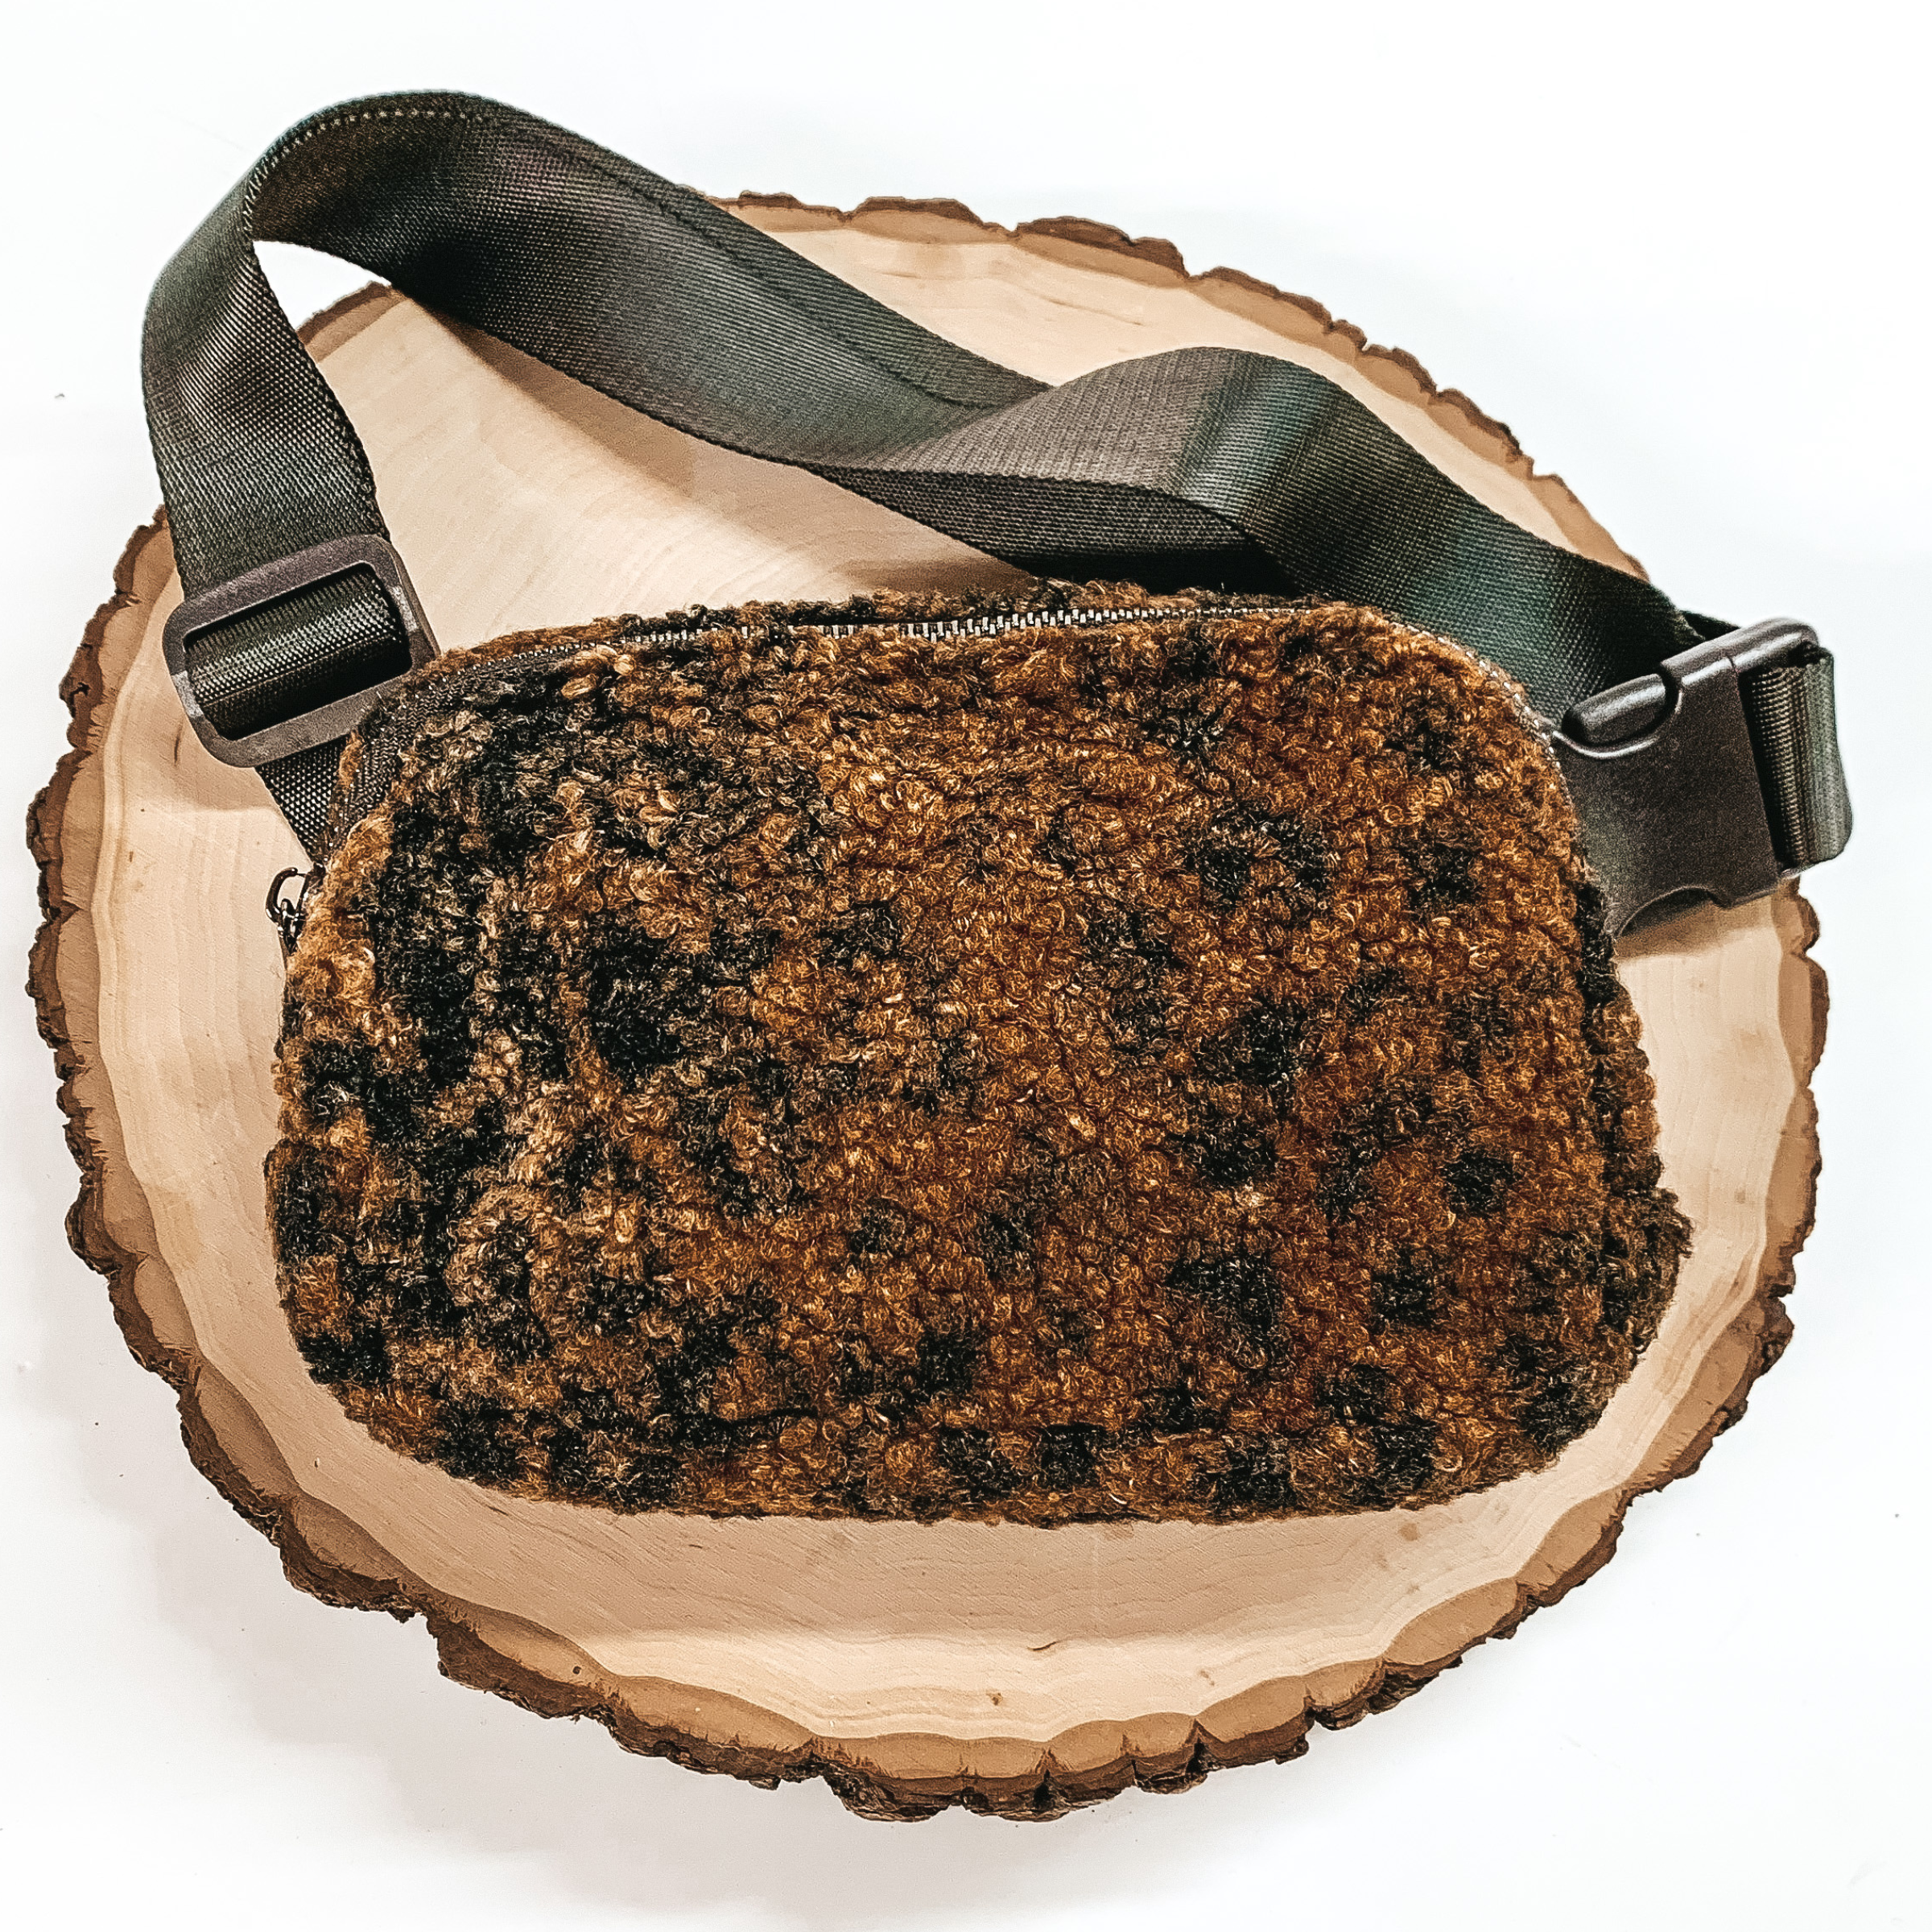 Leopard print, sherpa fanny pack with a top zipper across the front. This fanny pack also includes dark brown straps and dark brown clips. This fanny pack is pictured on a piece of wood on a white background. 